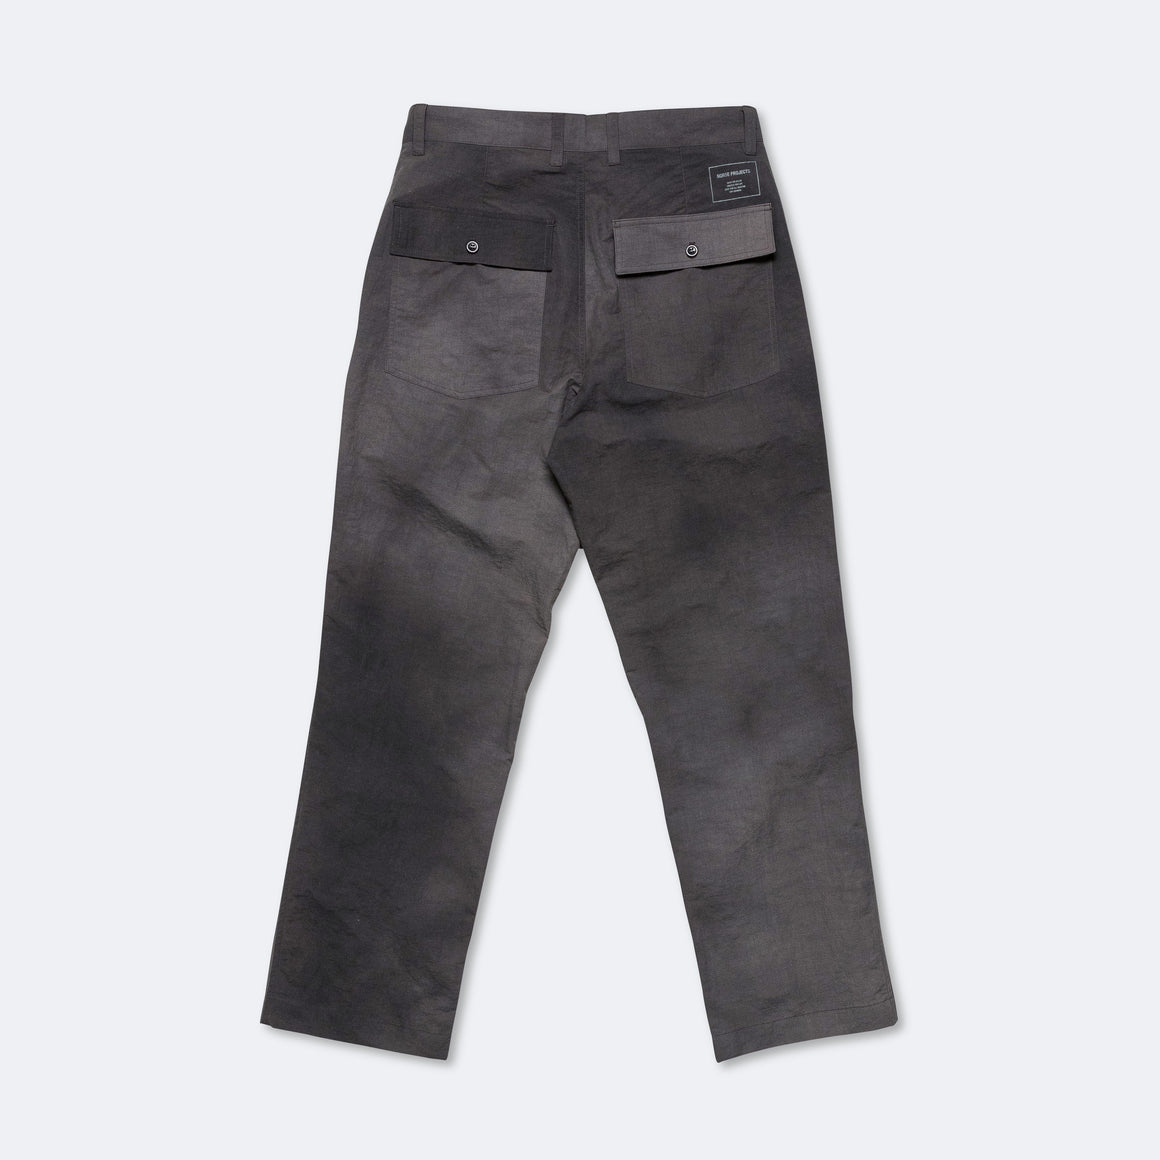 Norse Projects - Lukas Relaxed Wave Dye Trouser - Black - UP THERE